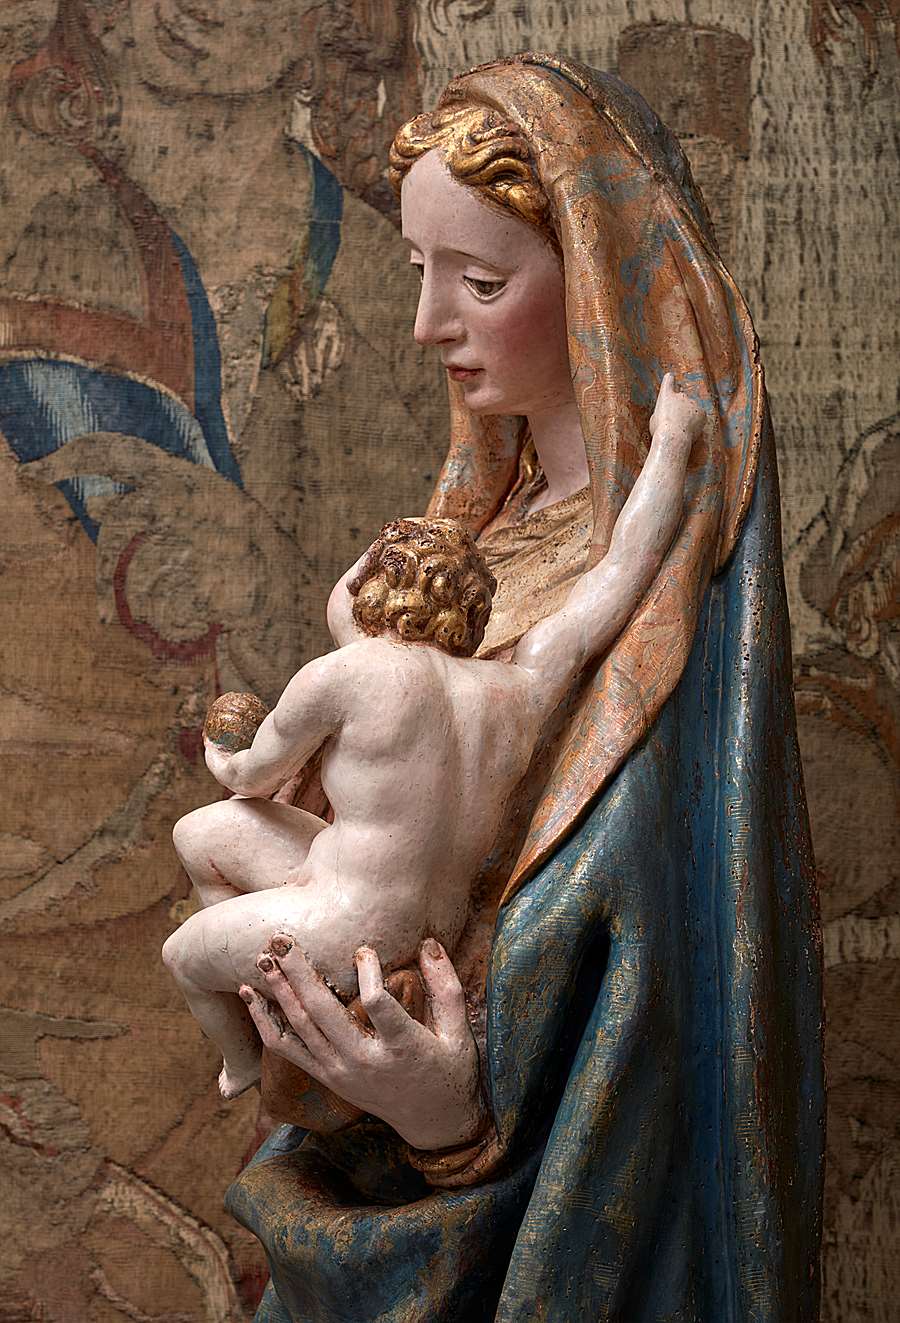 Our Lady and the Child Jesus